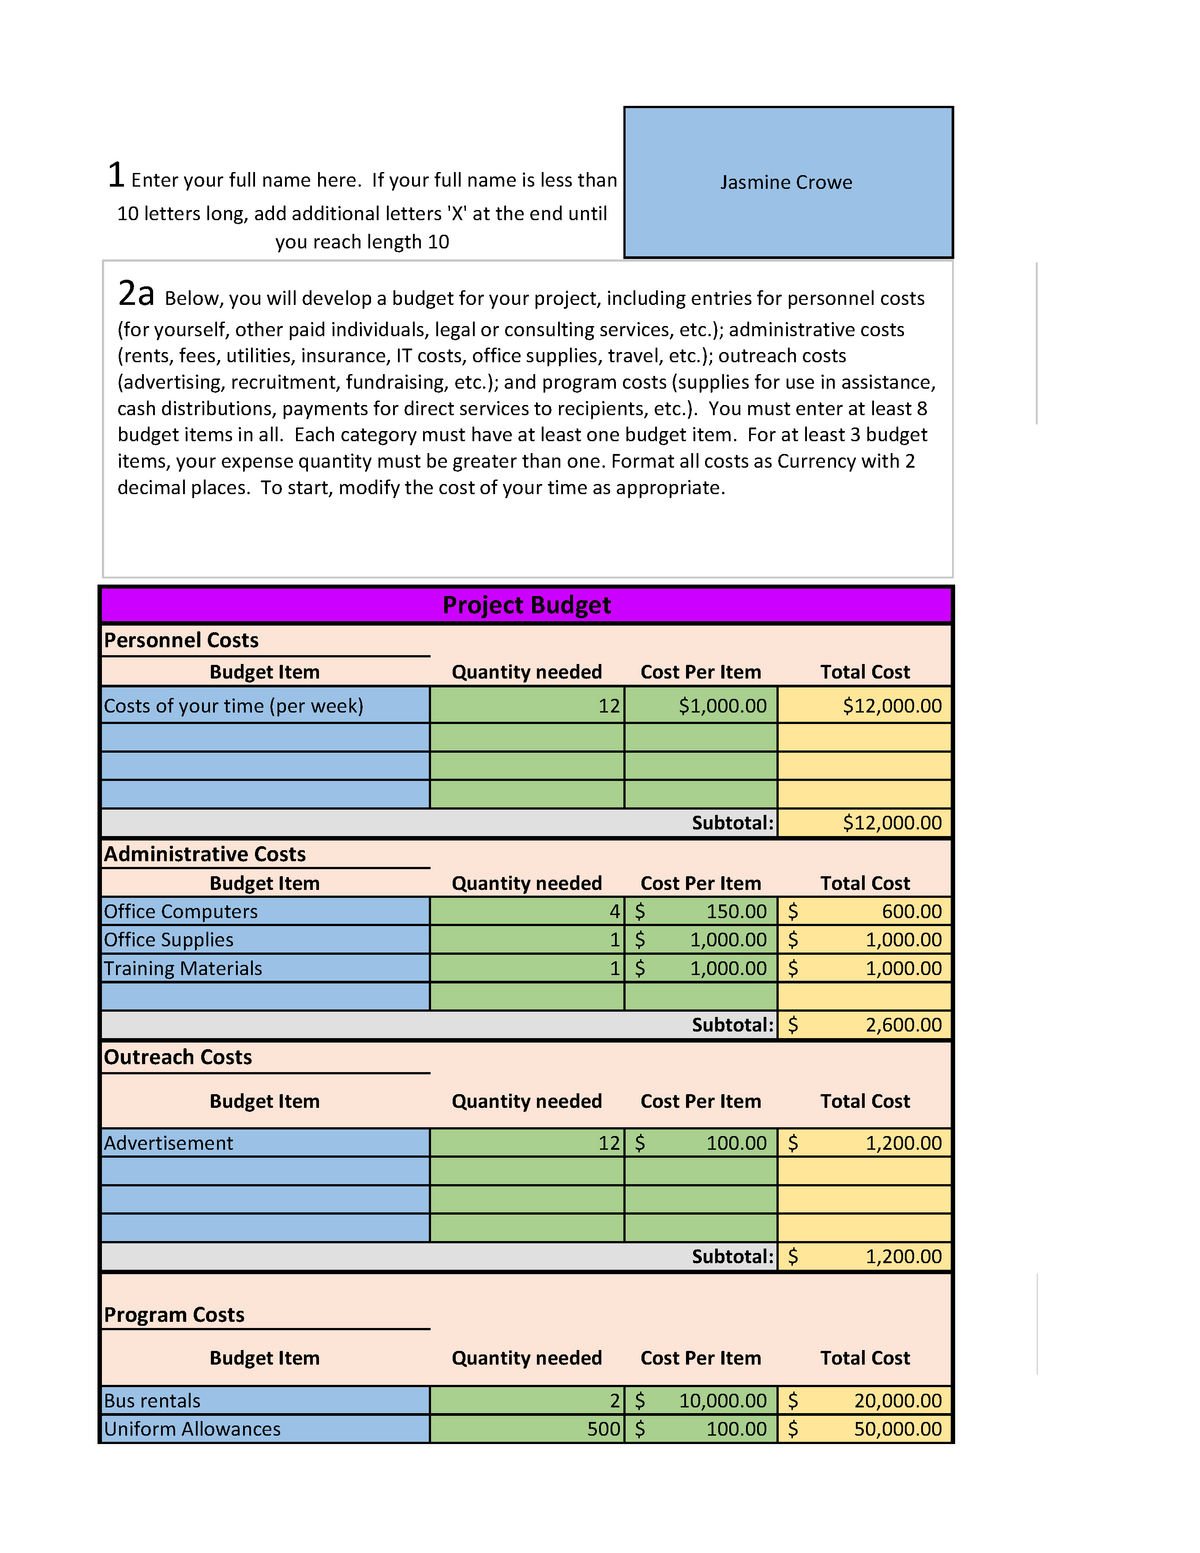 ma3-excel-template-202009-07-updated-202012-01-personnel-costs-budget-item-quantity-needed